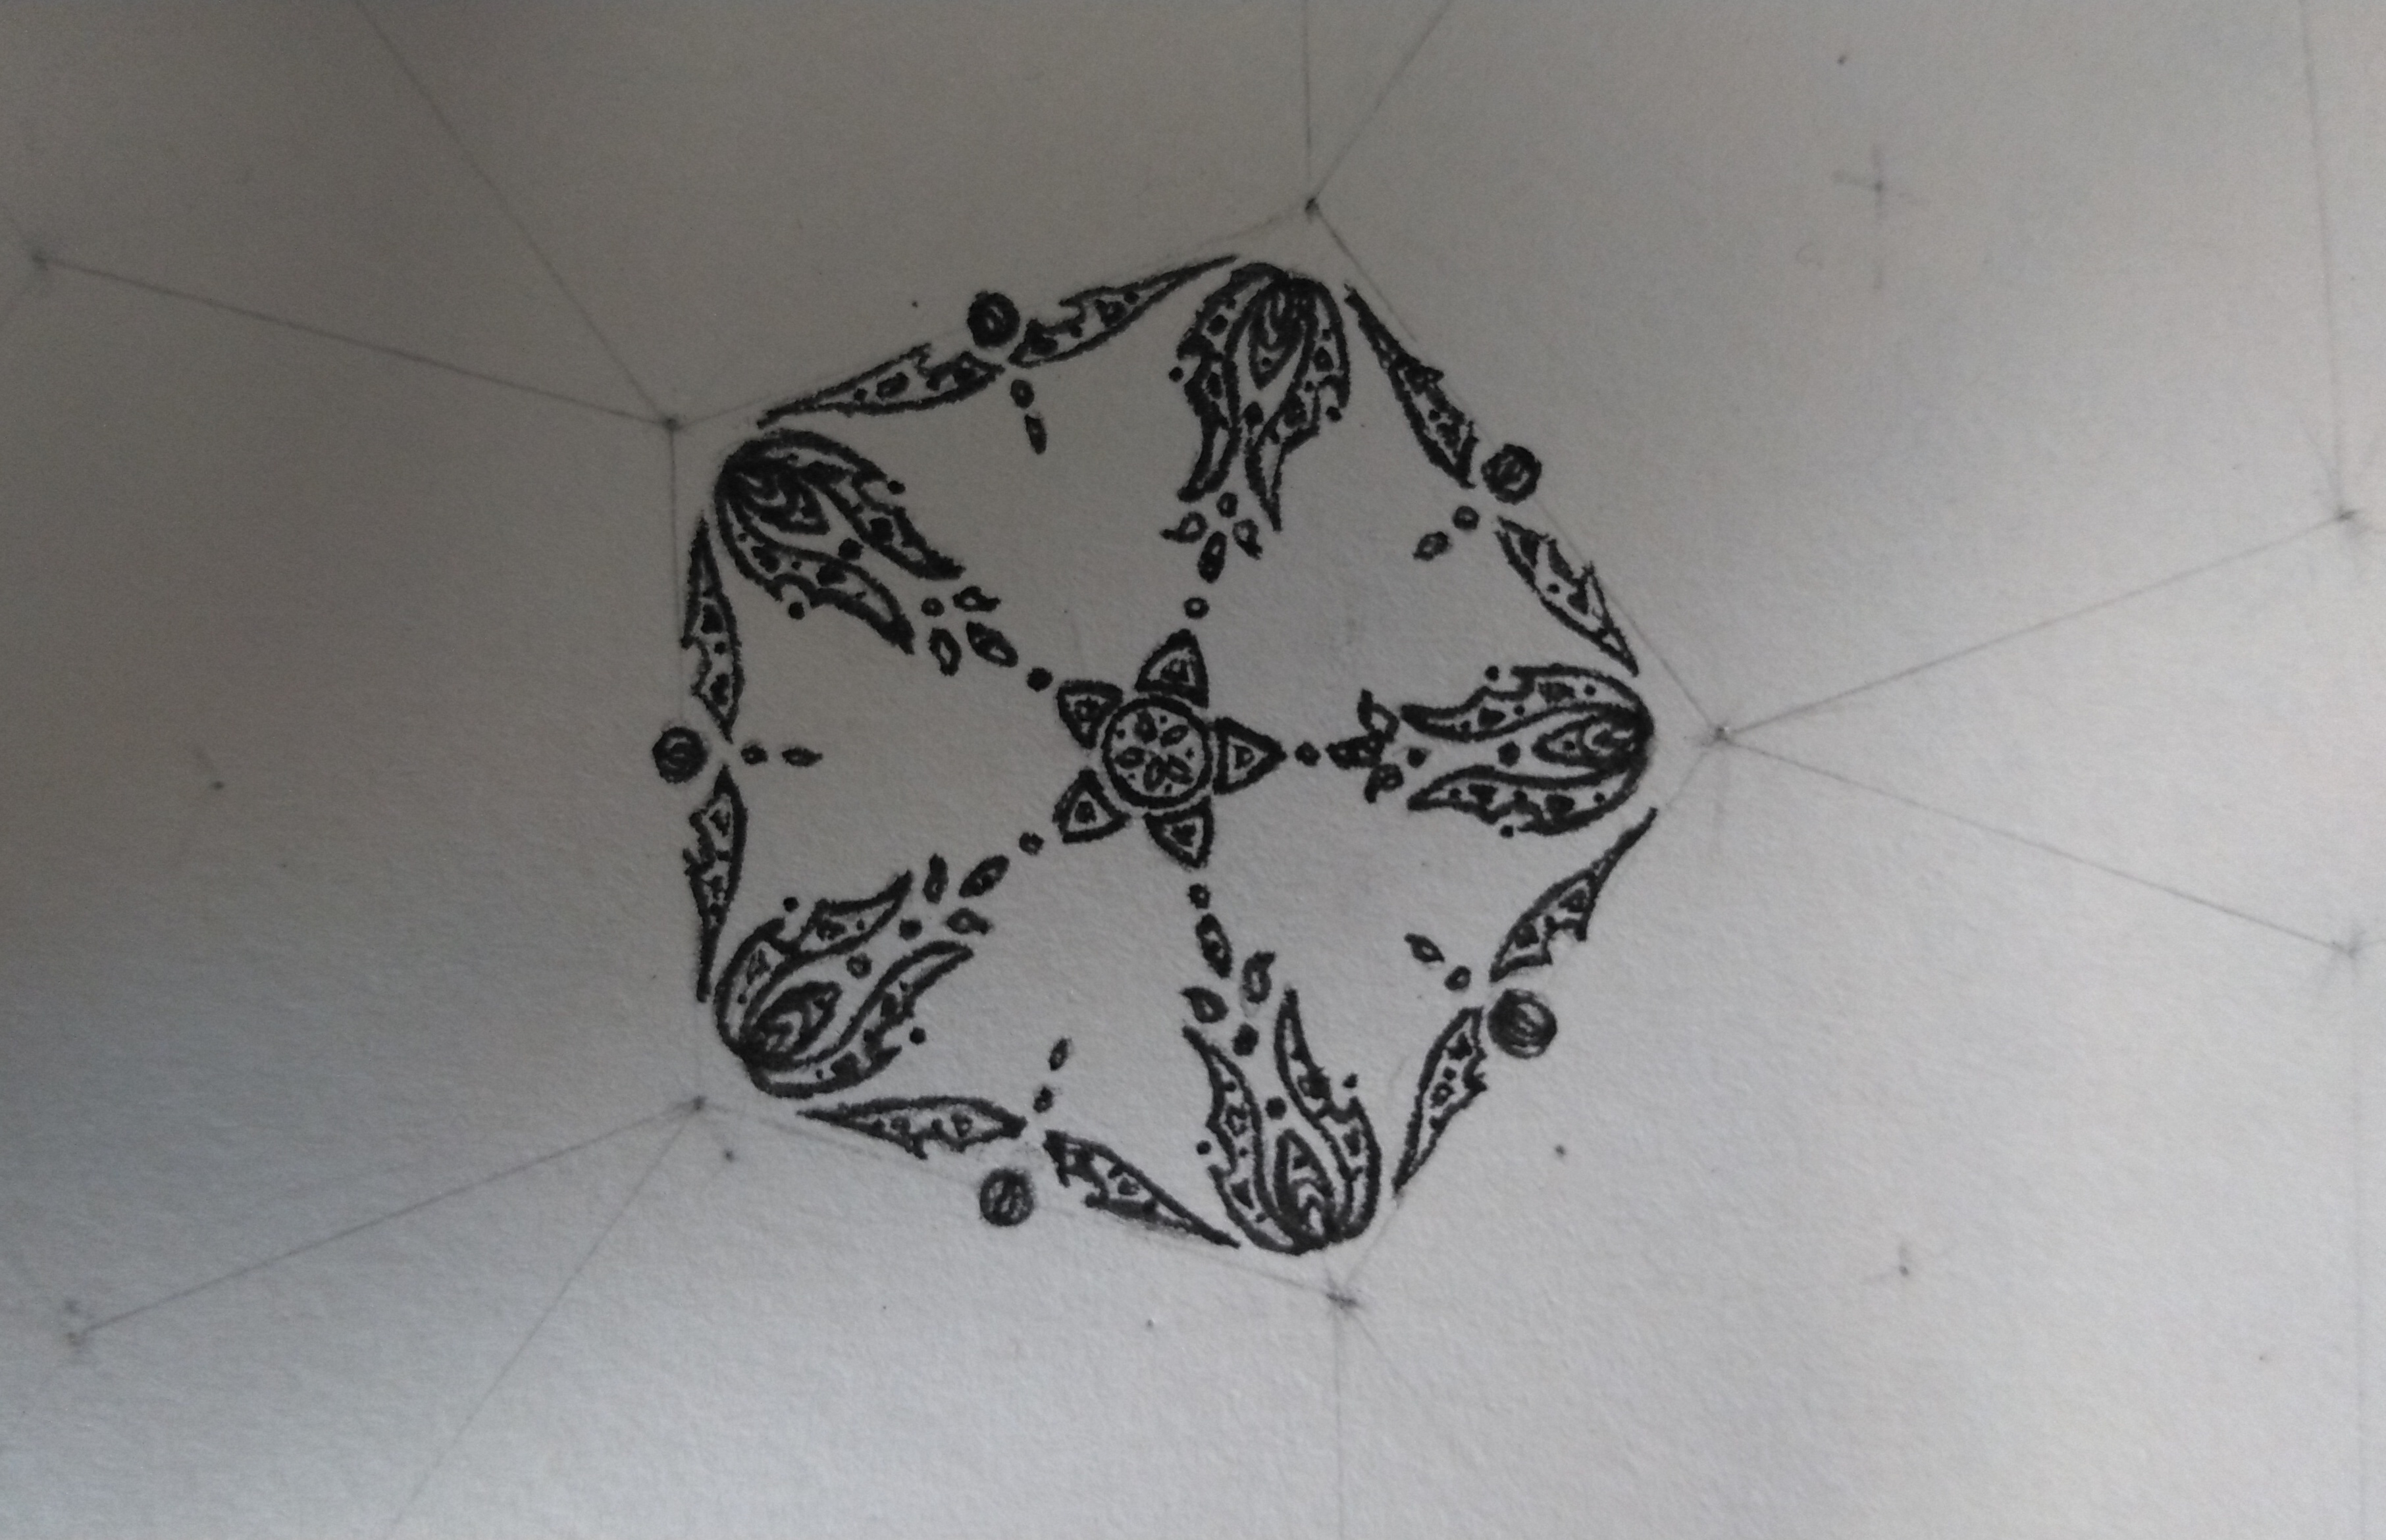 An ornamented pattern in progress. It is drawn over a grid of pentagons and diamonds.